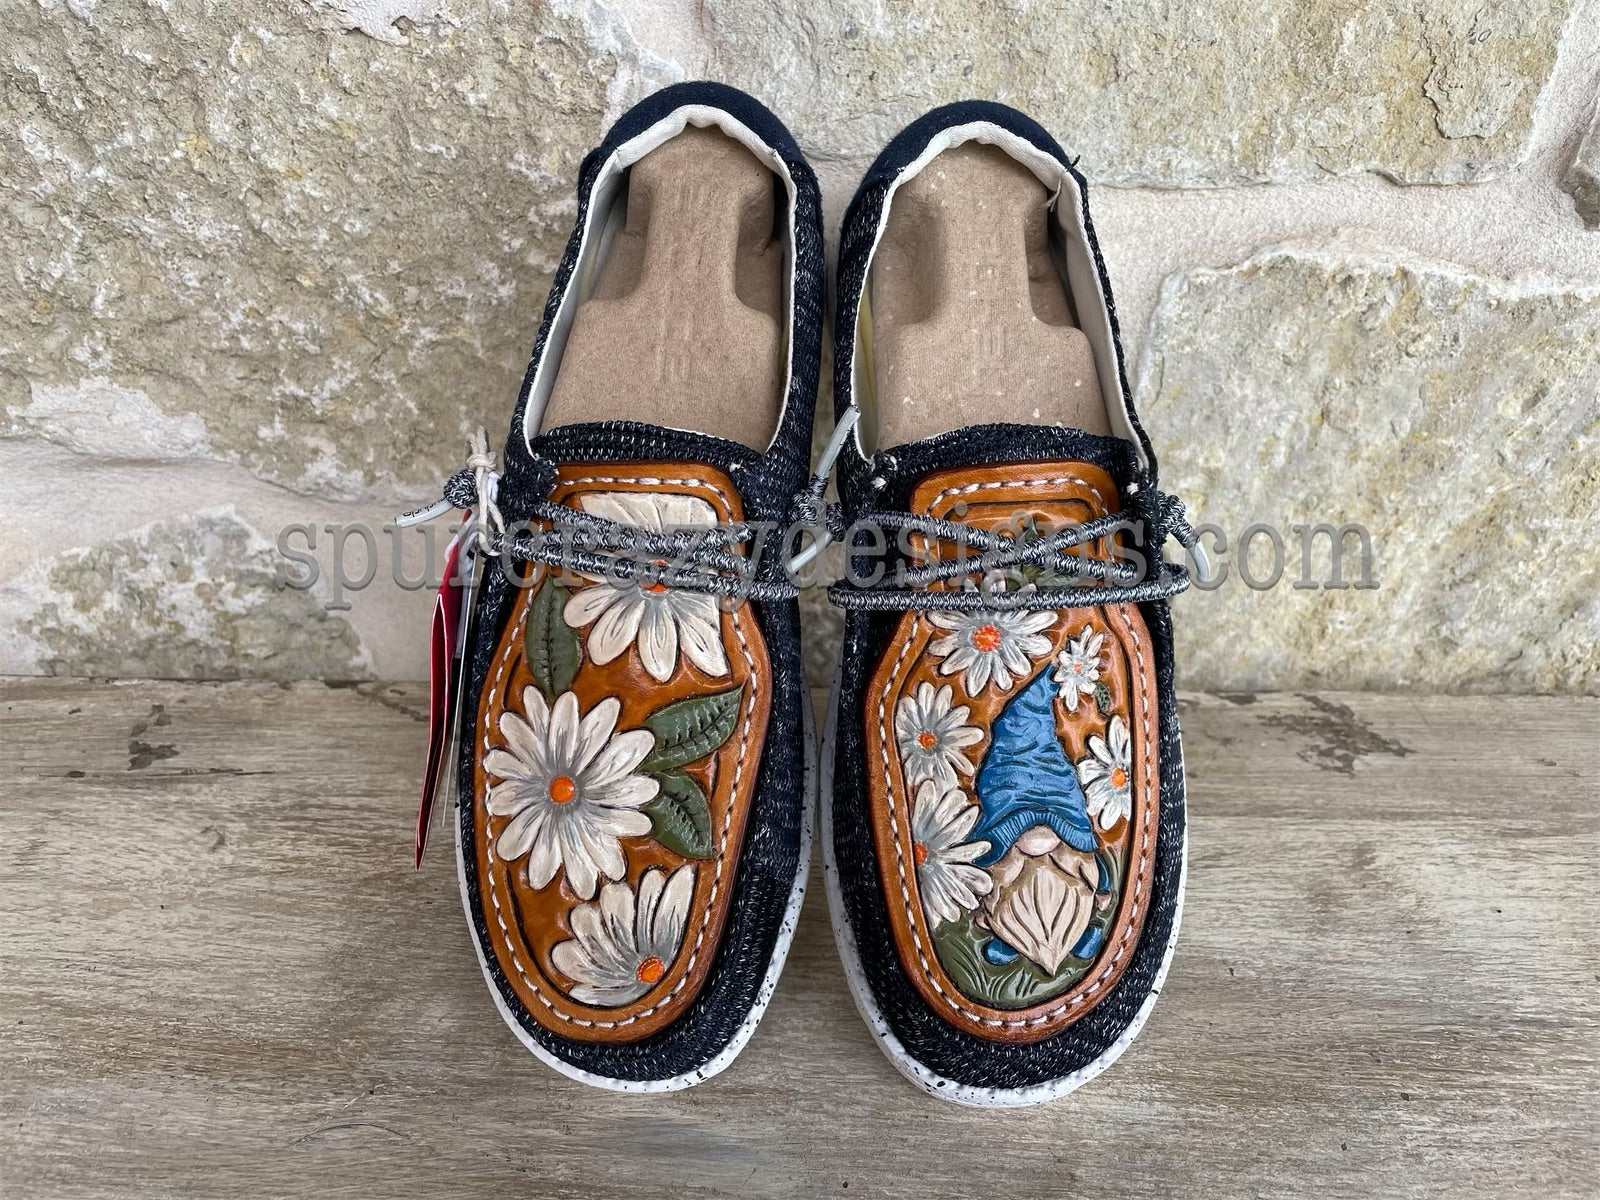 Gnome and Daisies Ladies Shoes – Spur Crazy Designs